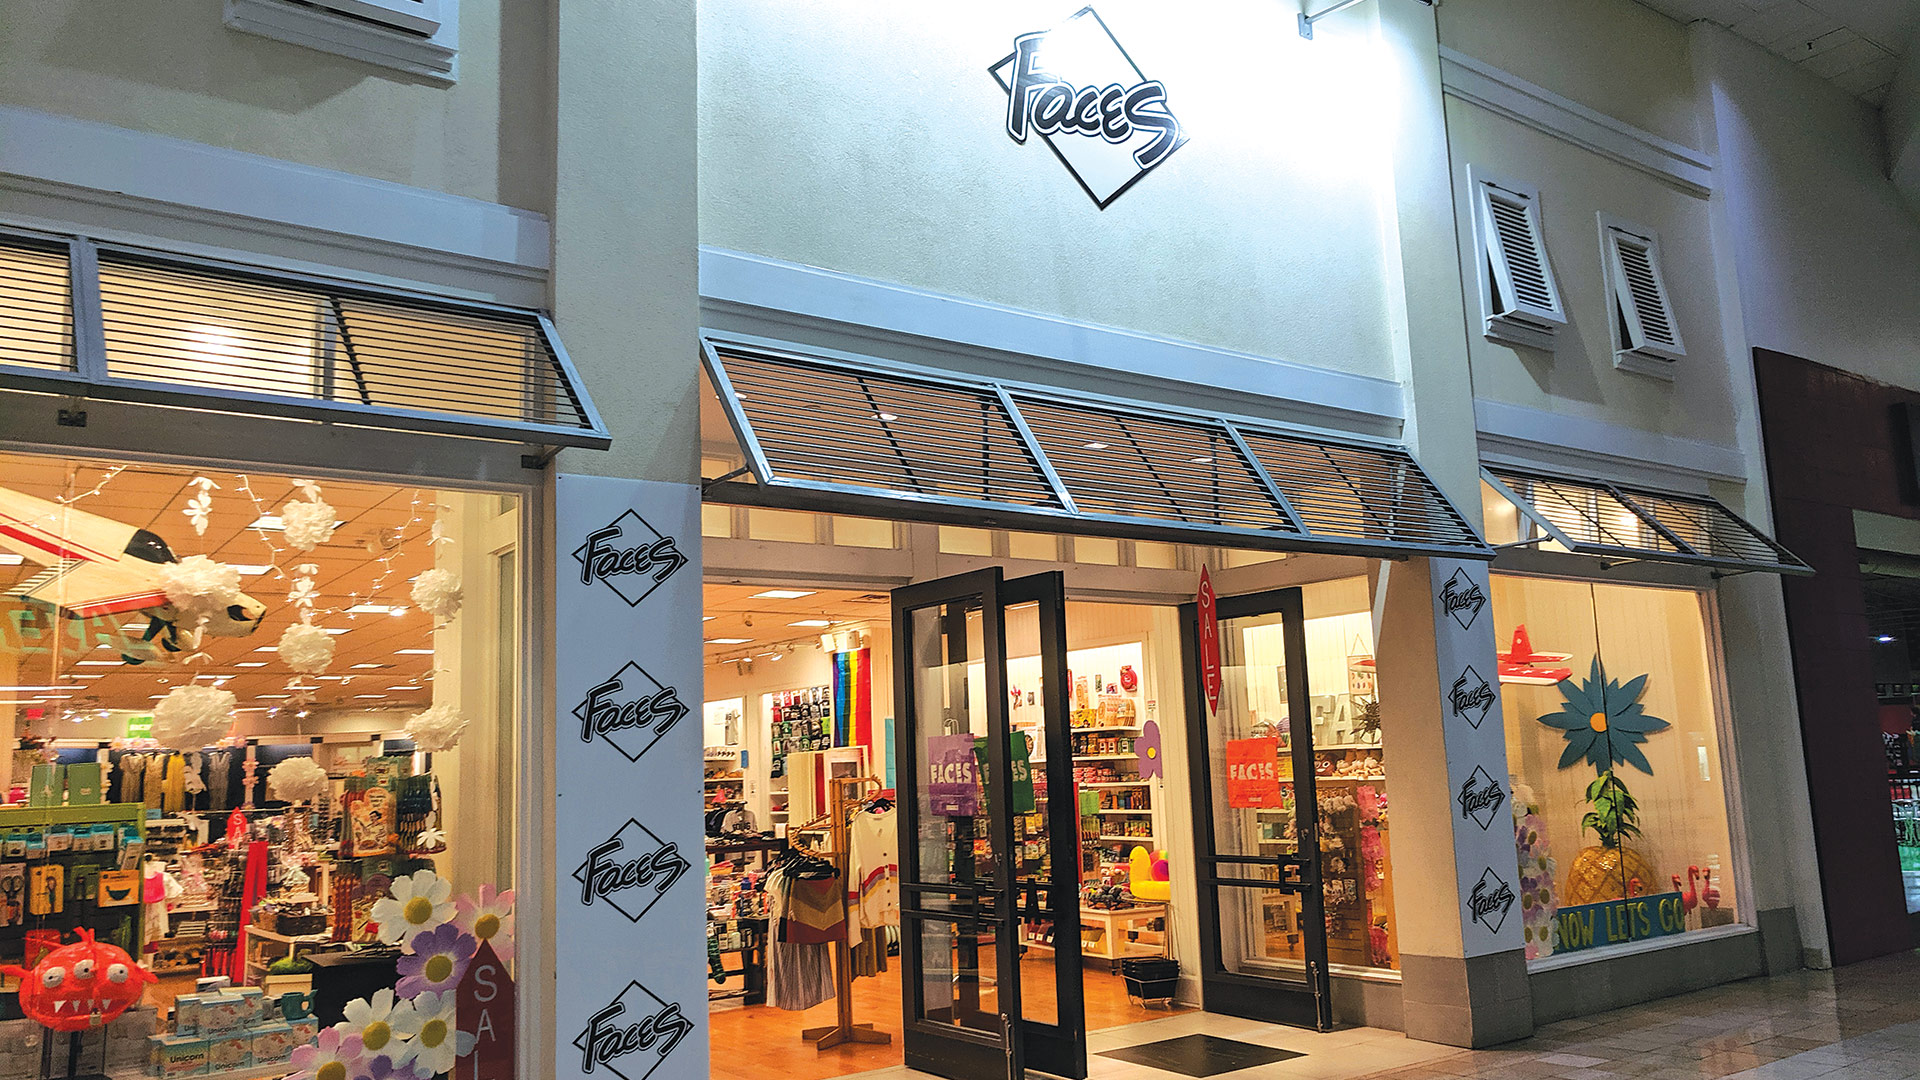 Faces built its name for 33 years in downtown Northampton, but now it’s one of the newest retail options a few miles to the east at Hampshire Mall. 